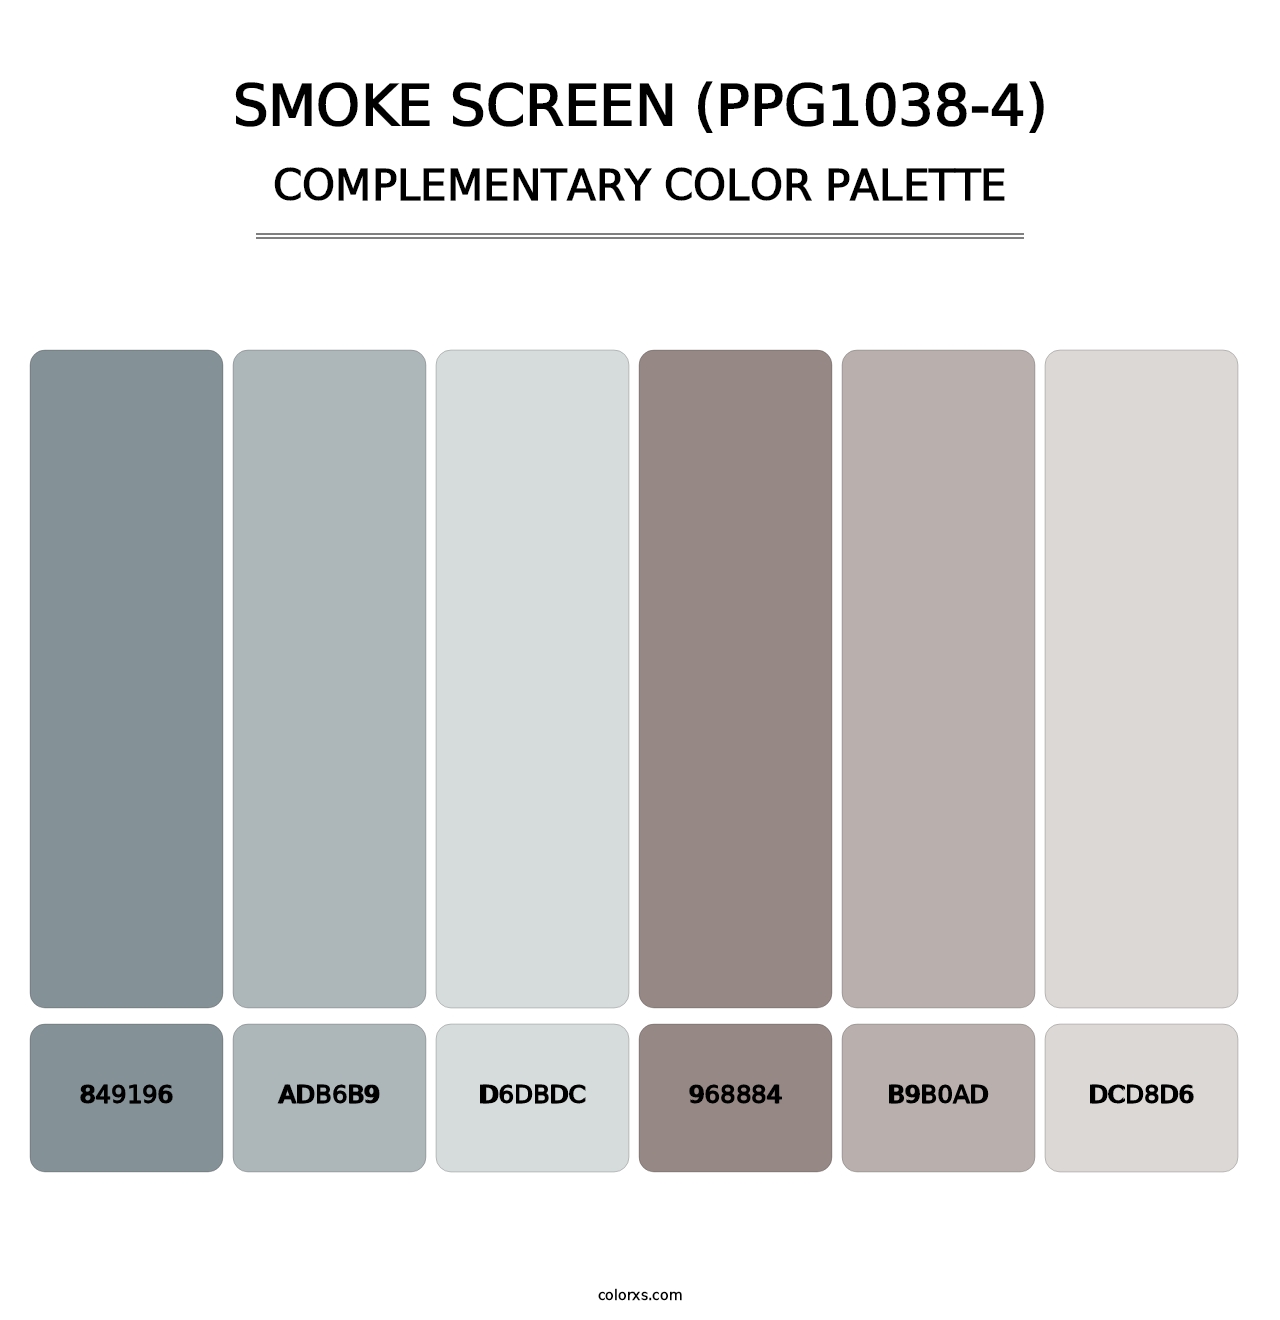 Smoke Screen (PPG1038-4) - Complementary Color Palette